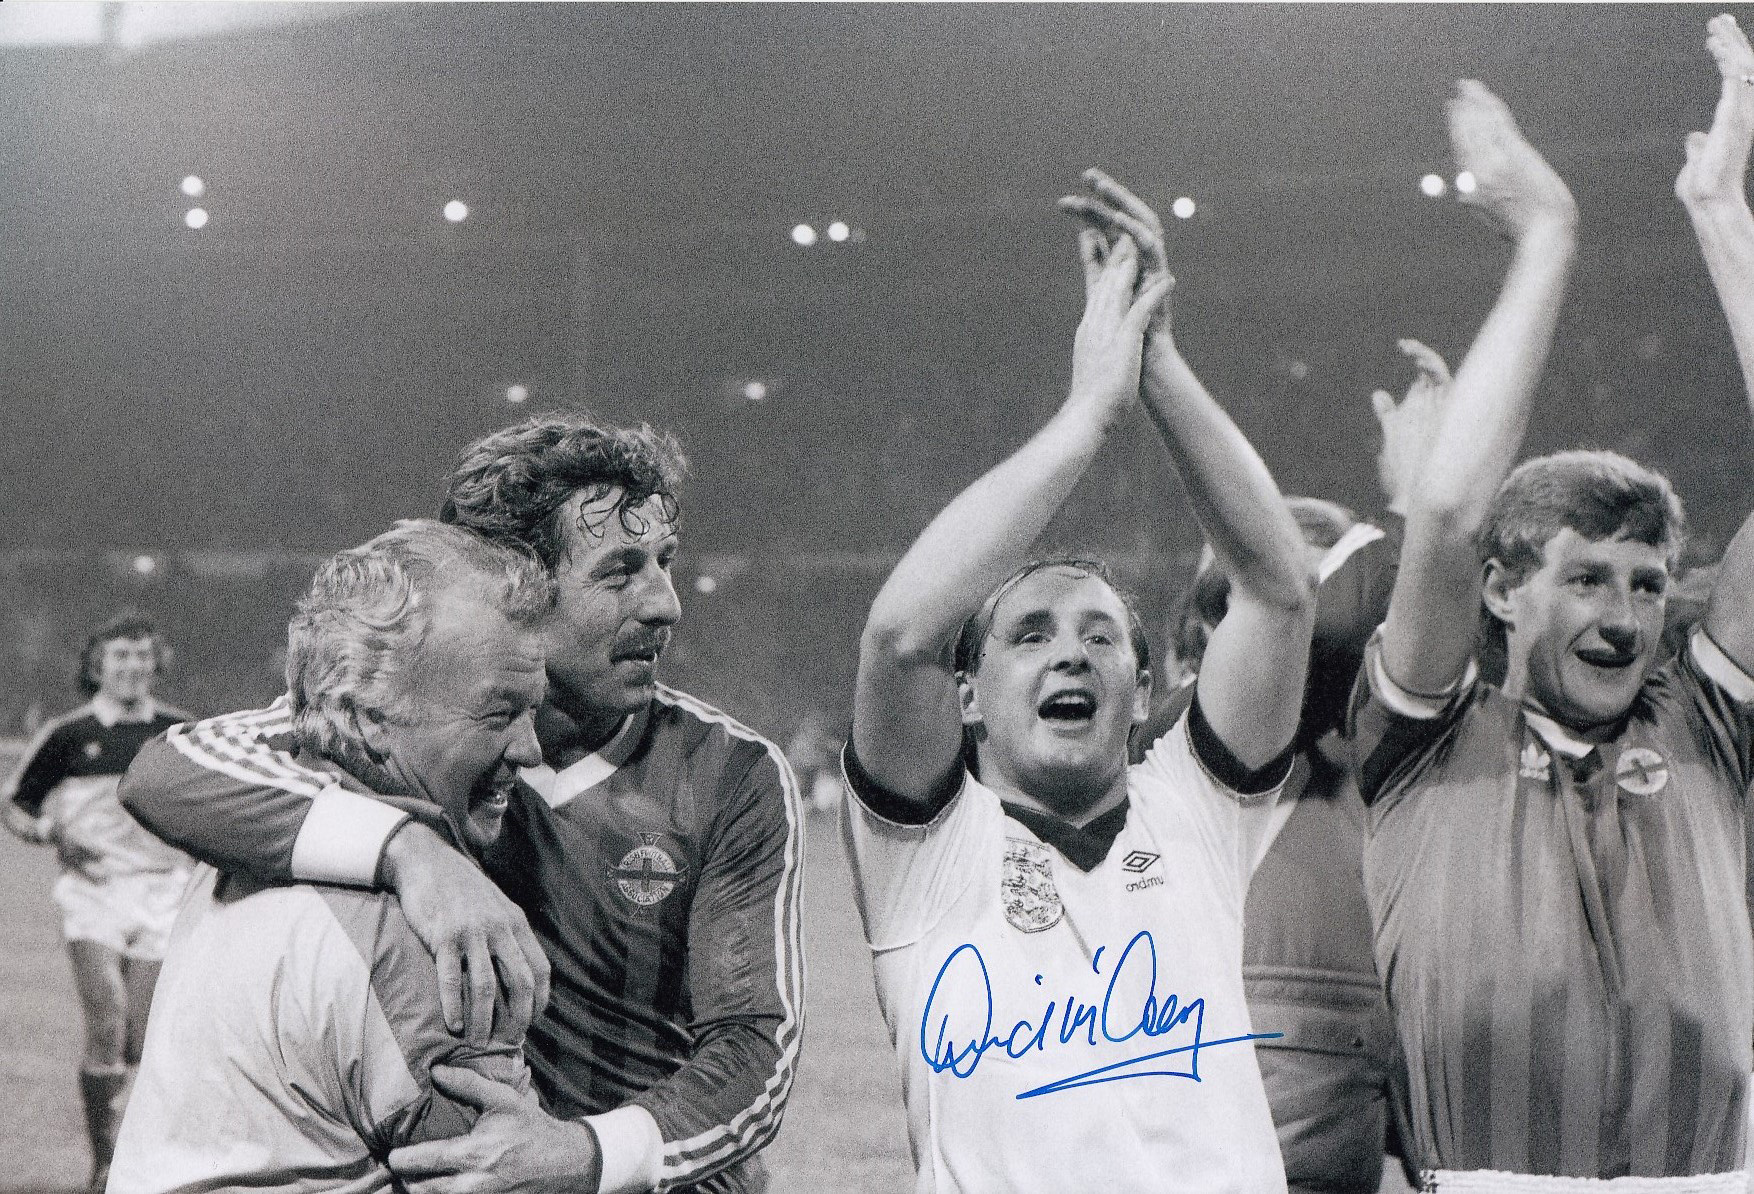 Autographed David McCreery 12 X 8 Photo - B/W, Depicting Northern Ireland Manager Billy Bingham With